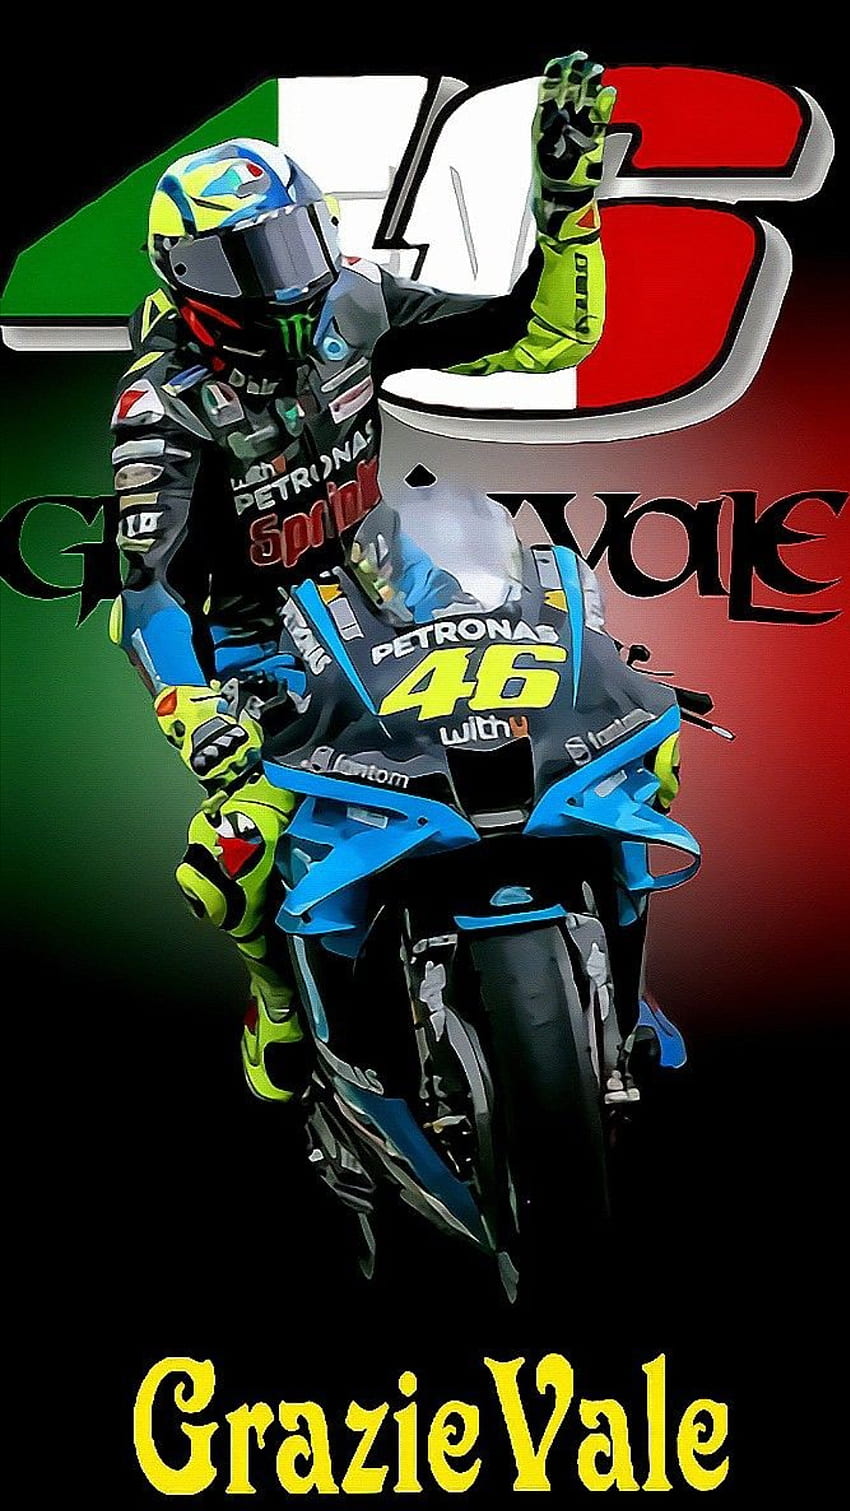 1920x1080px, 1080P Free download | VR 46, motorcycle, racing, italian ...